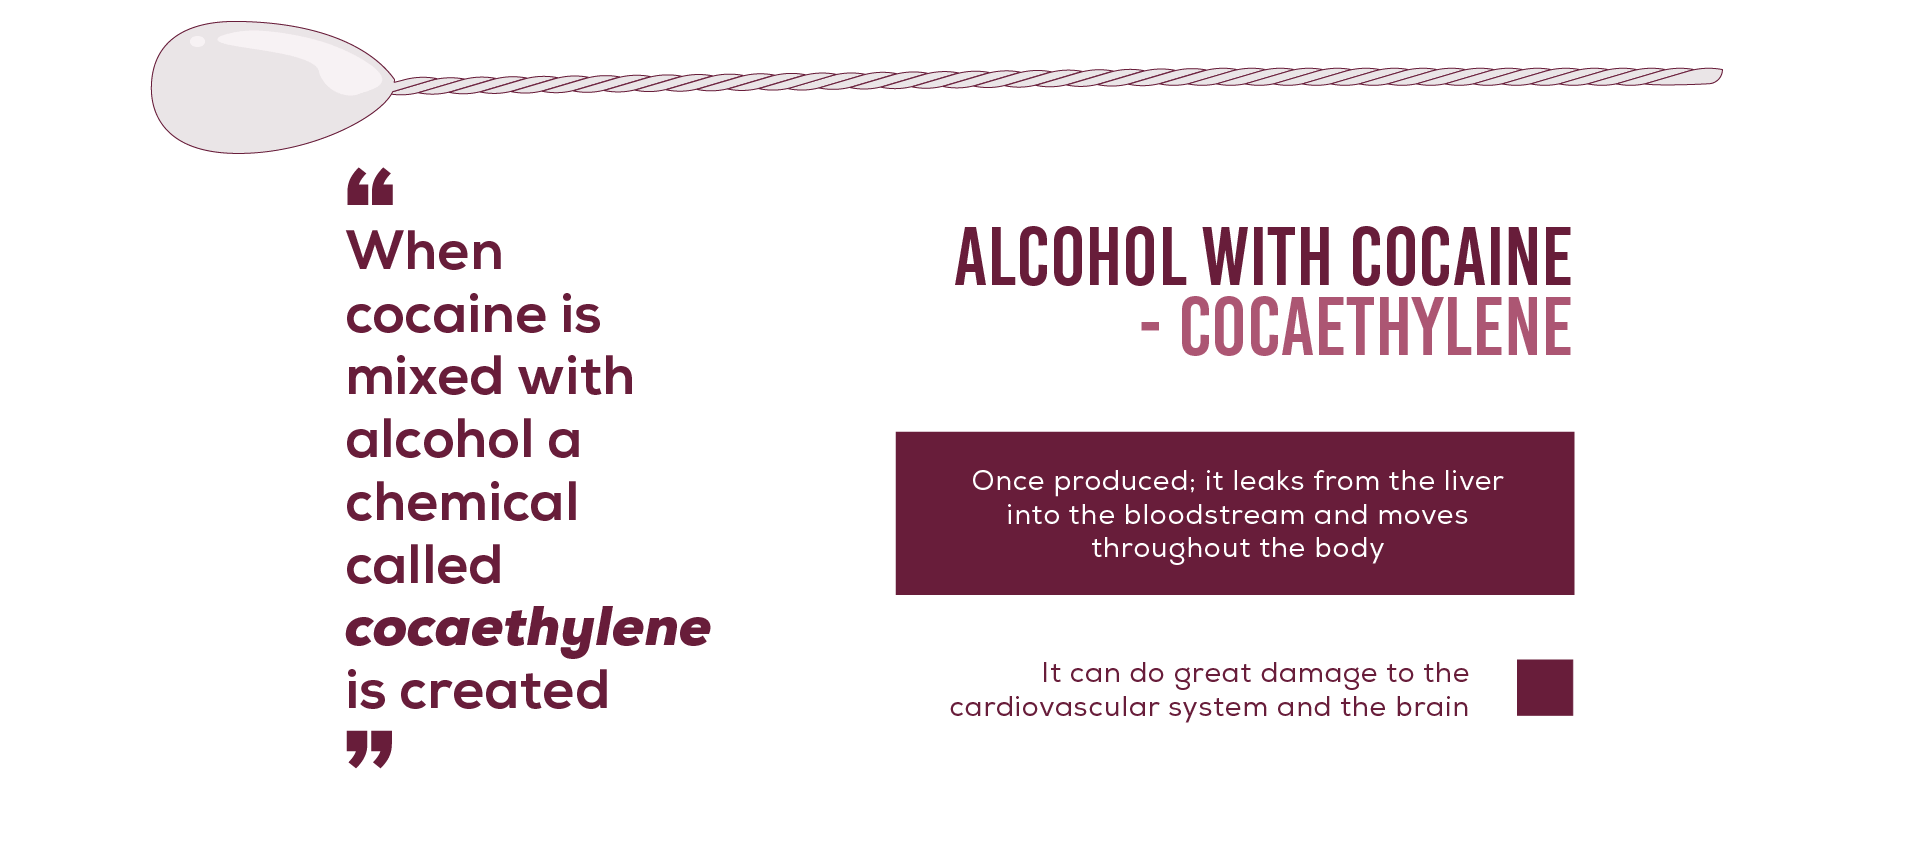 Mixing Alcohol With Cocaine